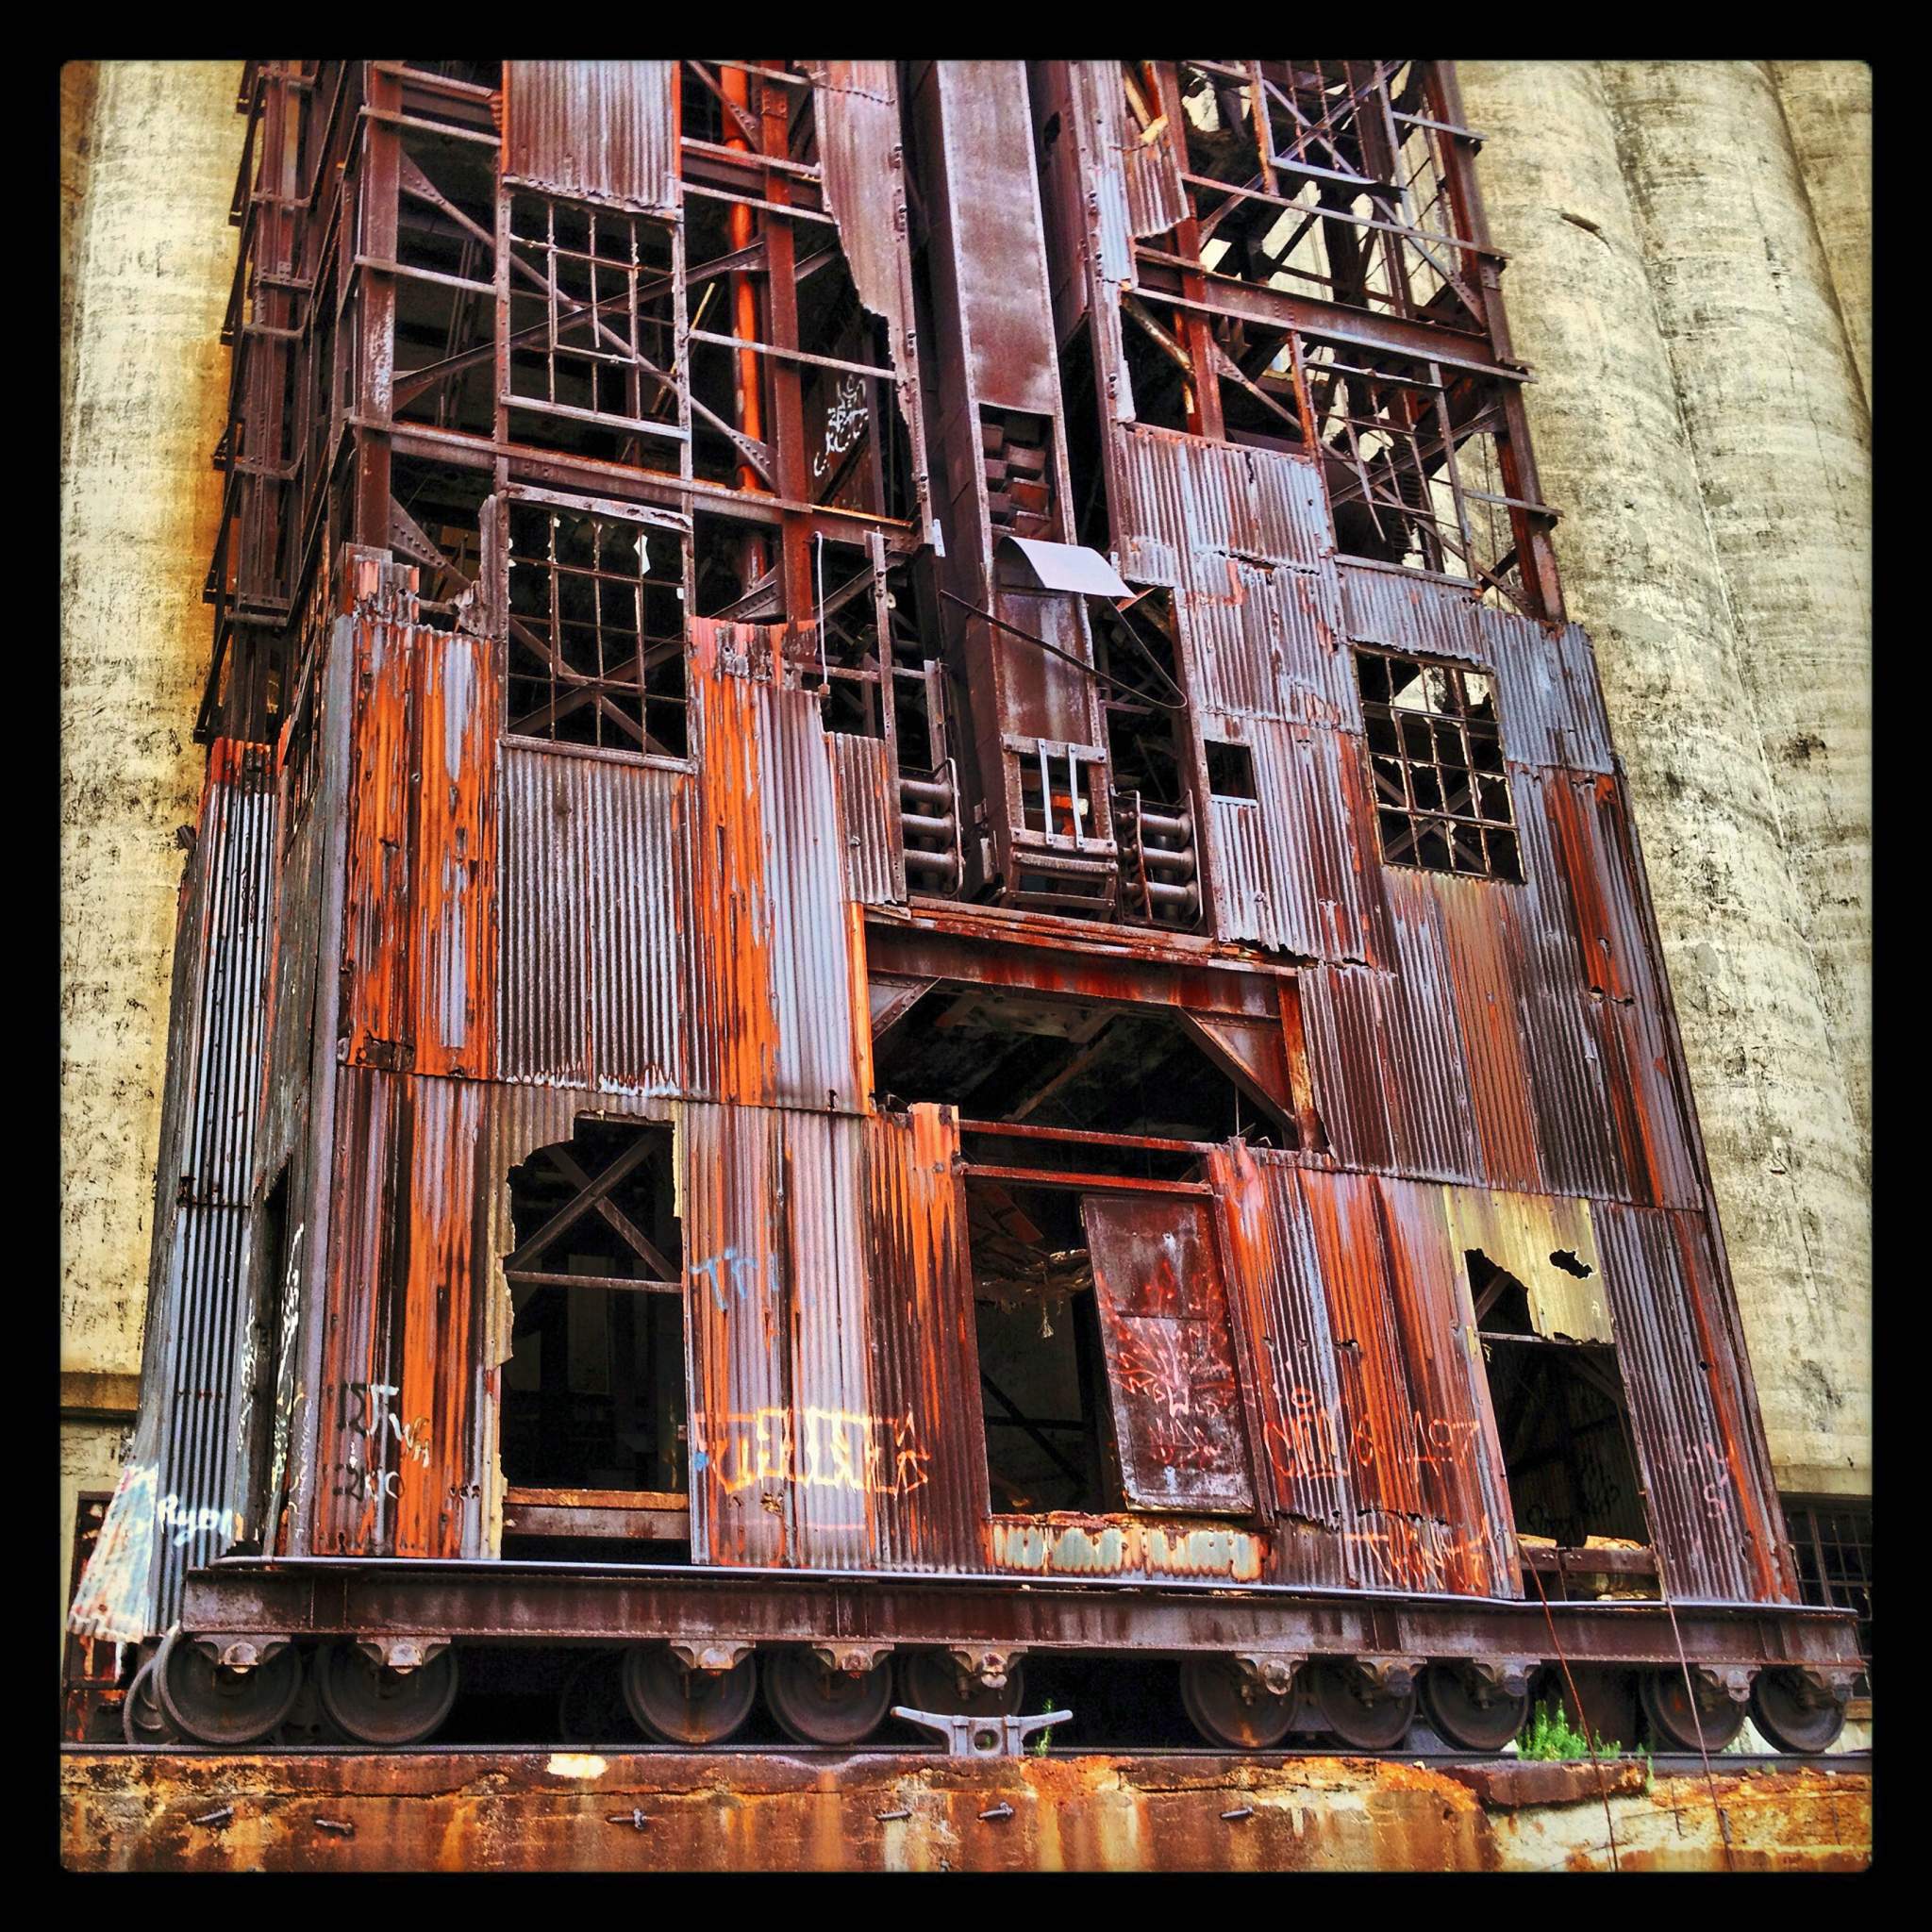 Industrial architecture in the Rust Belt